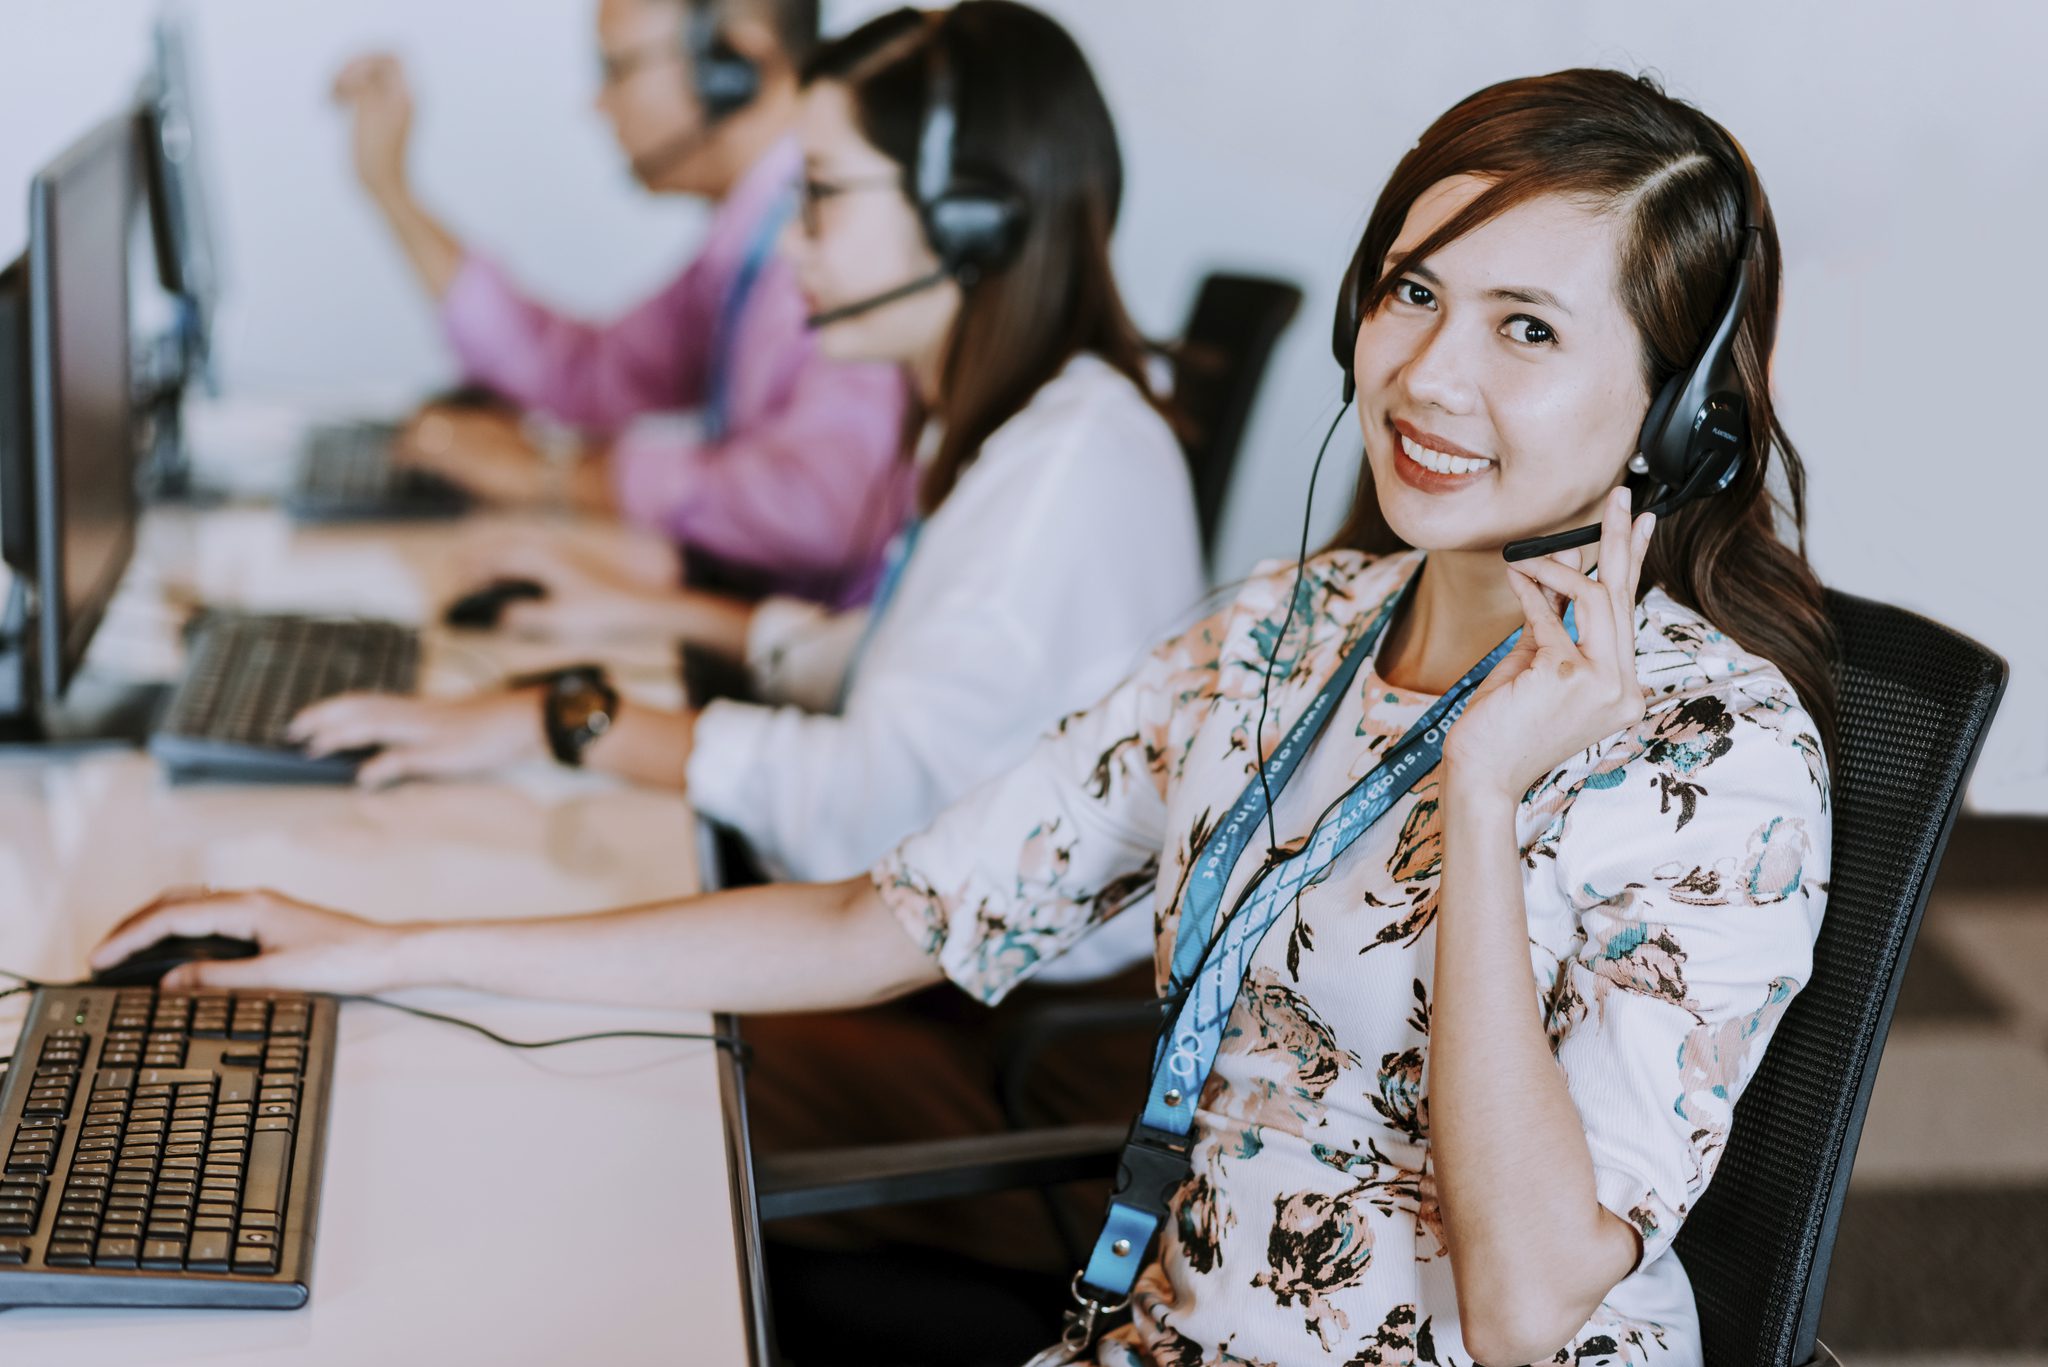 Smiling Female call center agent holding her headset with a headset